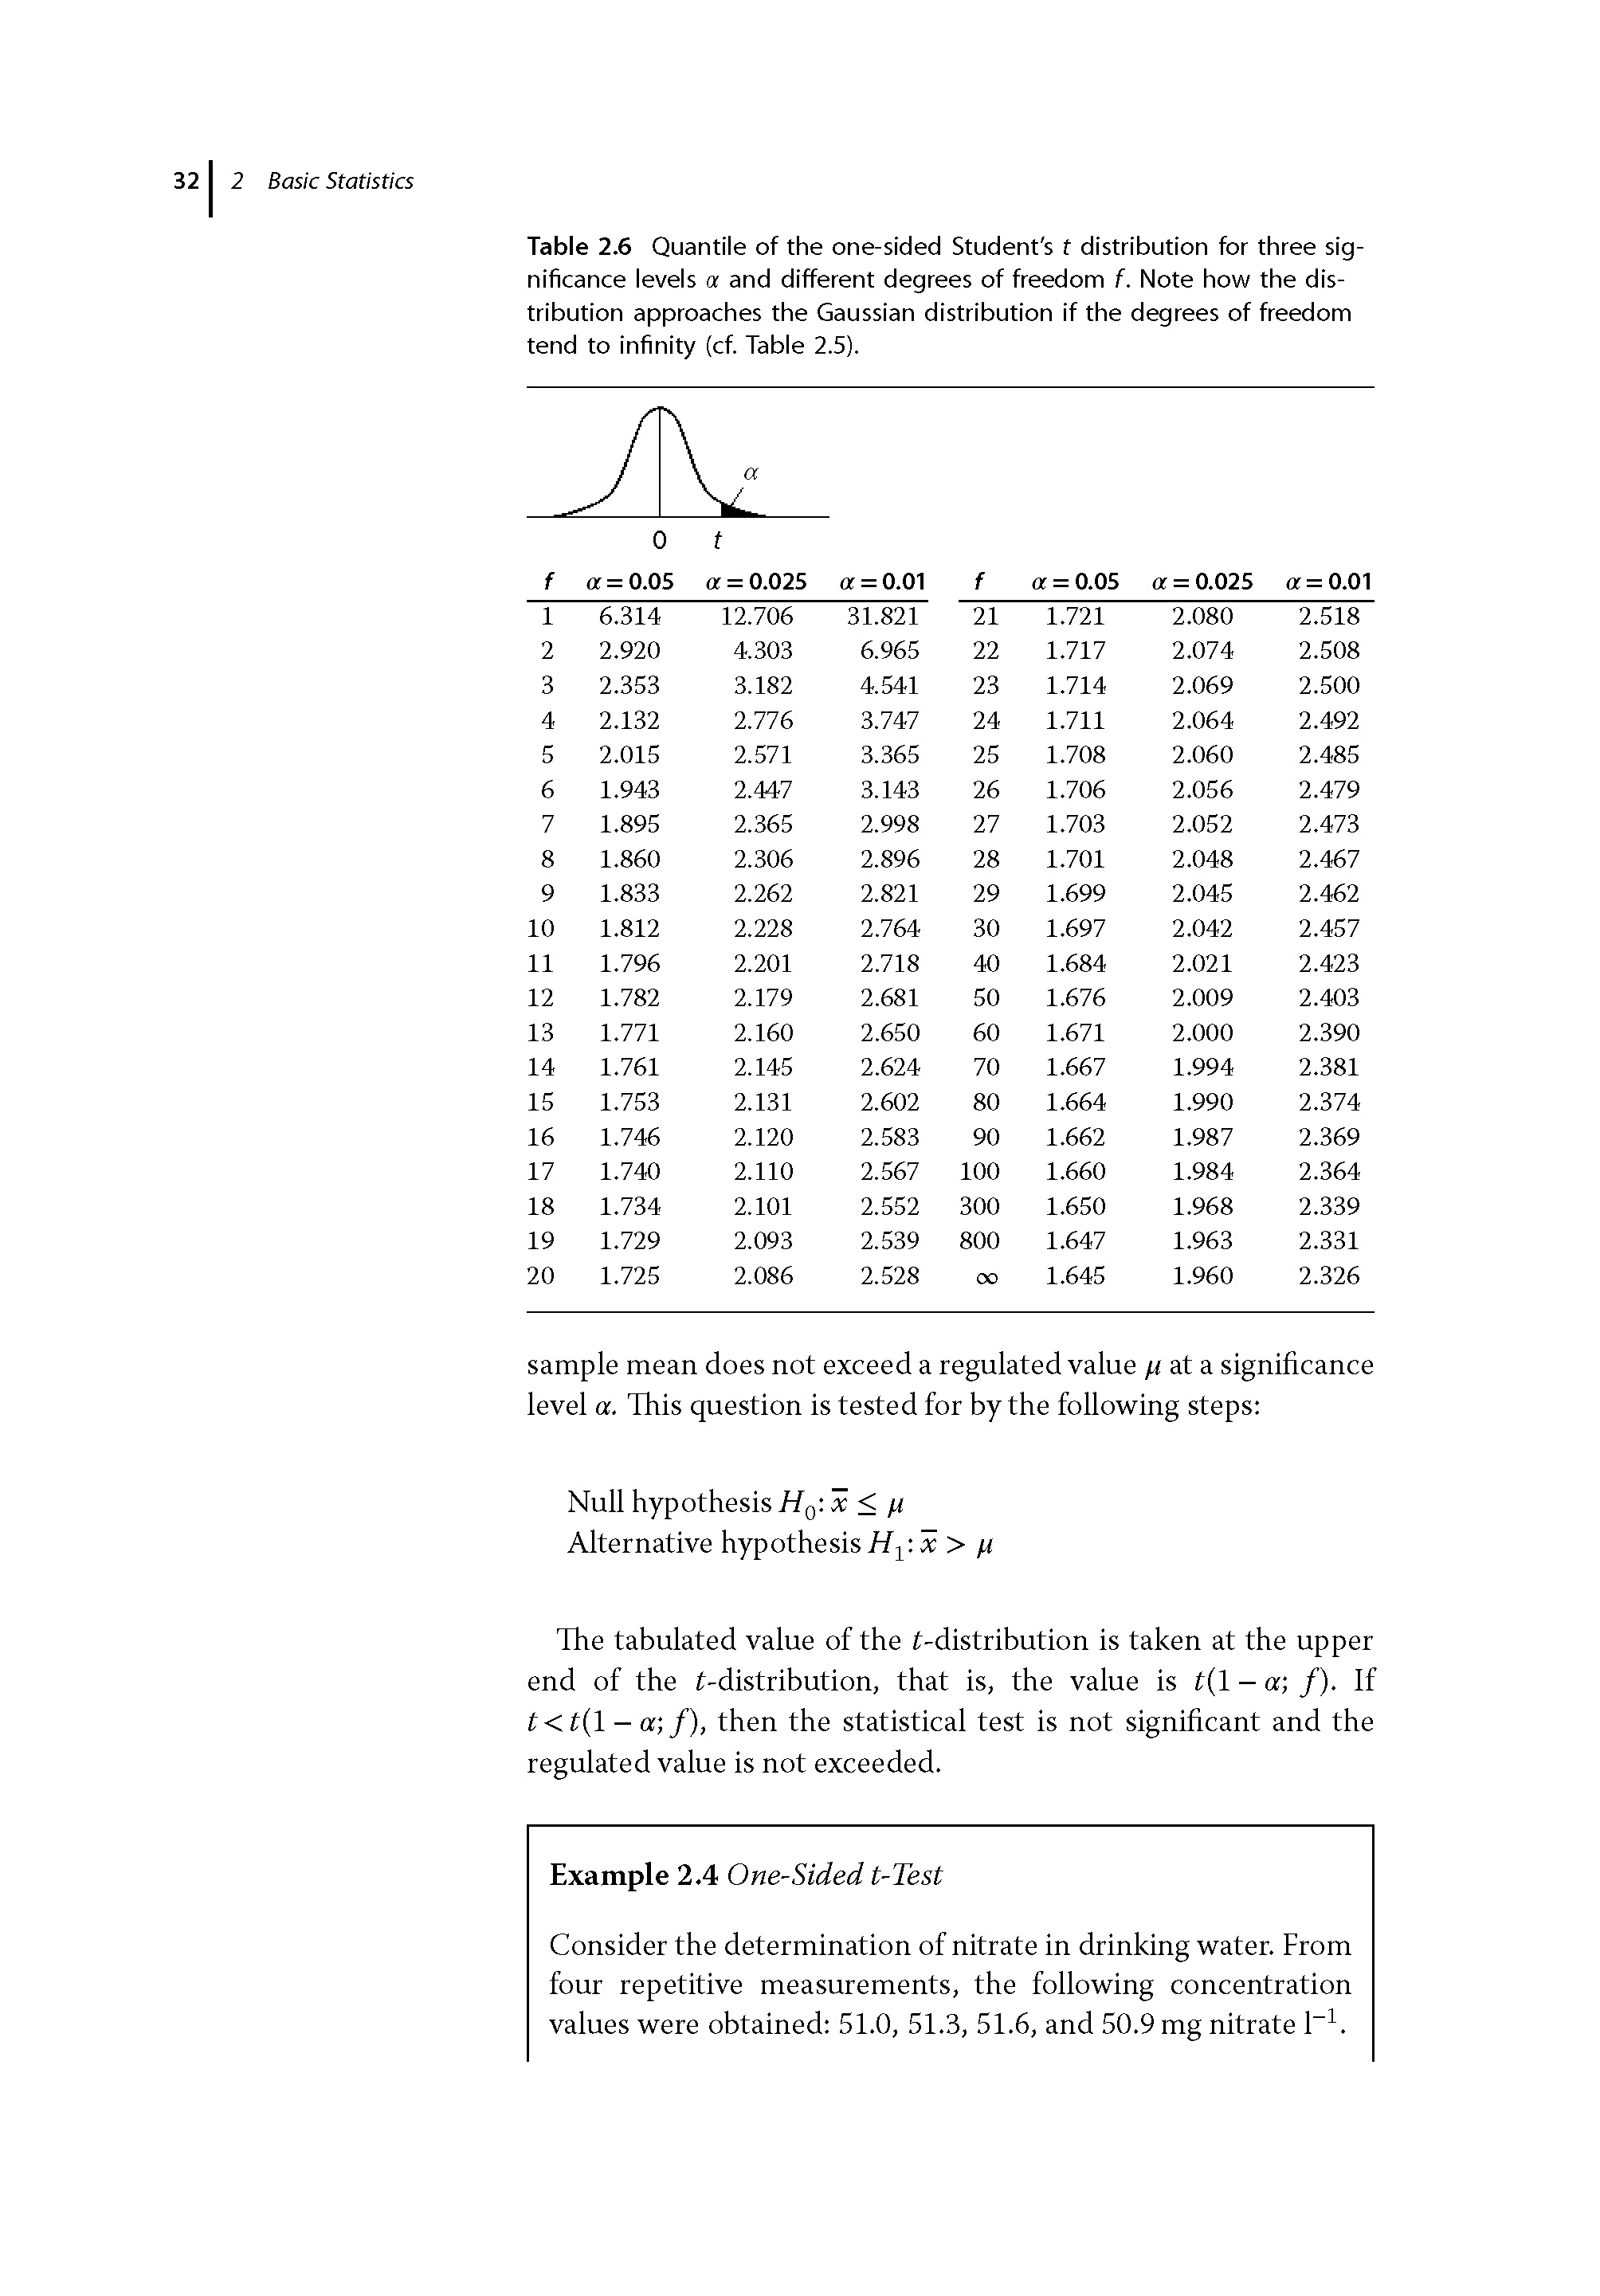 Table 2.6 Quantile of the one-sided Student s f distribution for three significance levels a and different degrees of freedom f. Note how the distribution approaches the Gaussian distribution if the degrees of freedom tend to infinity (cf. Table 2.5).